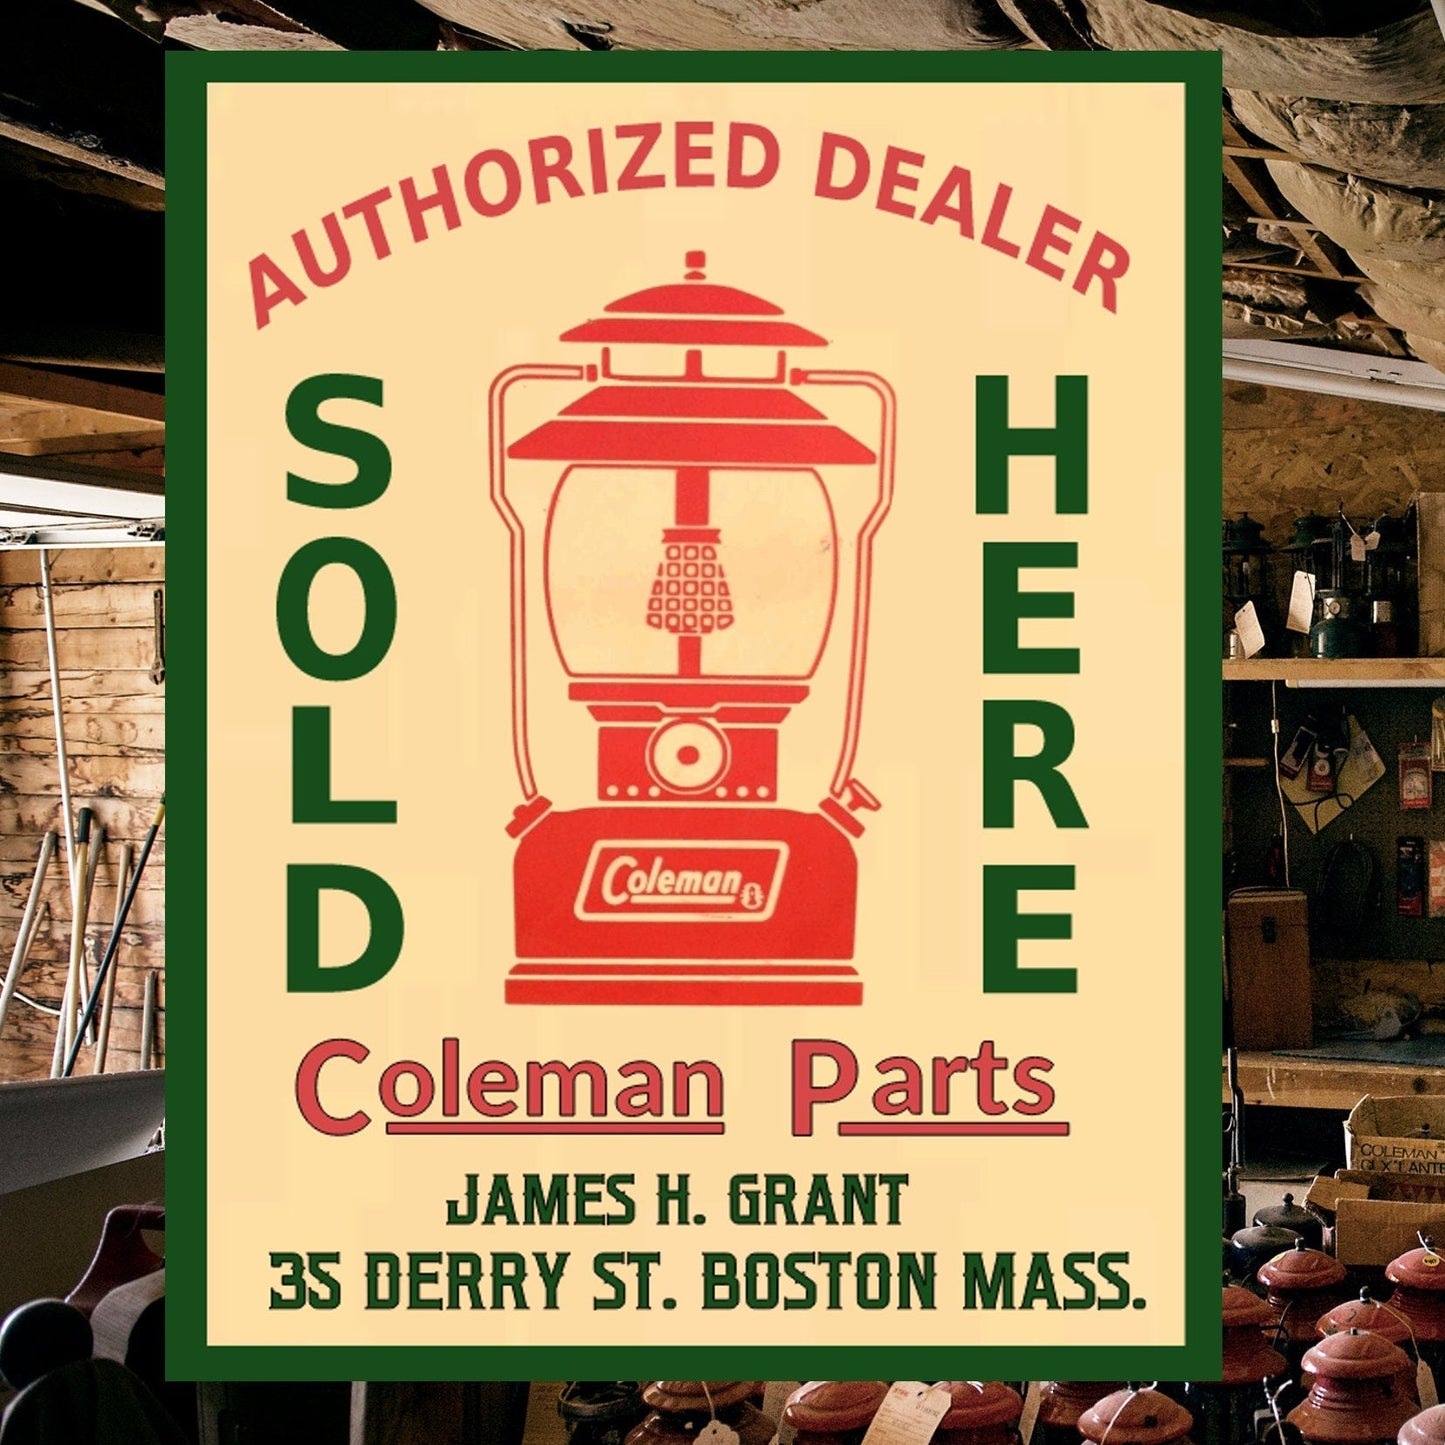 coleman sign  authorized dealer coleman parts sold here personalized